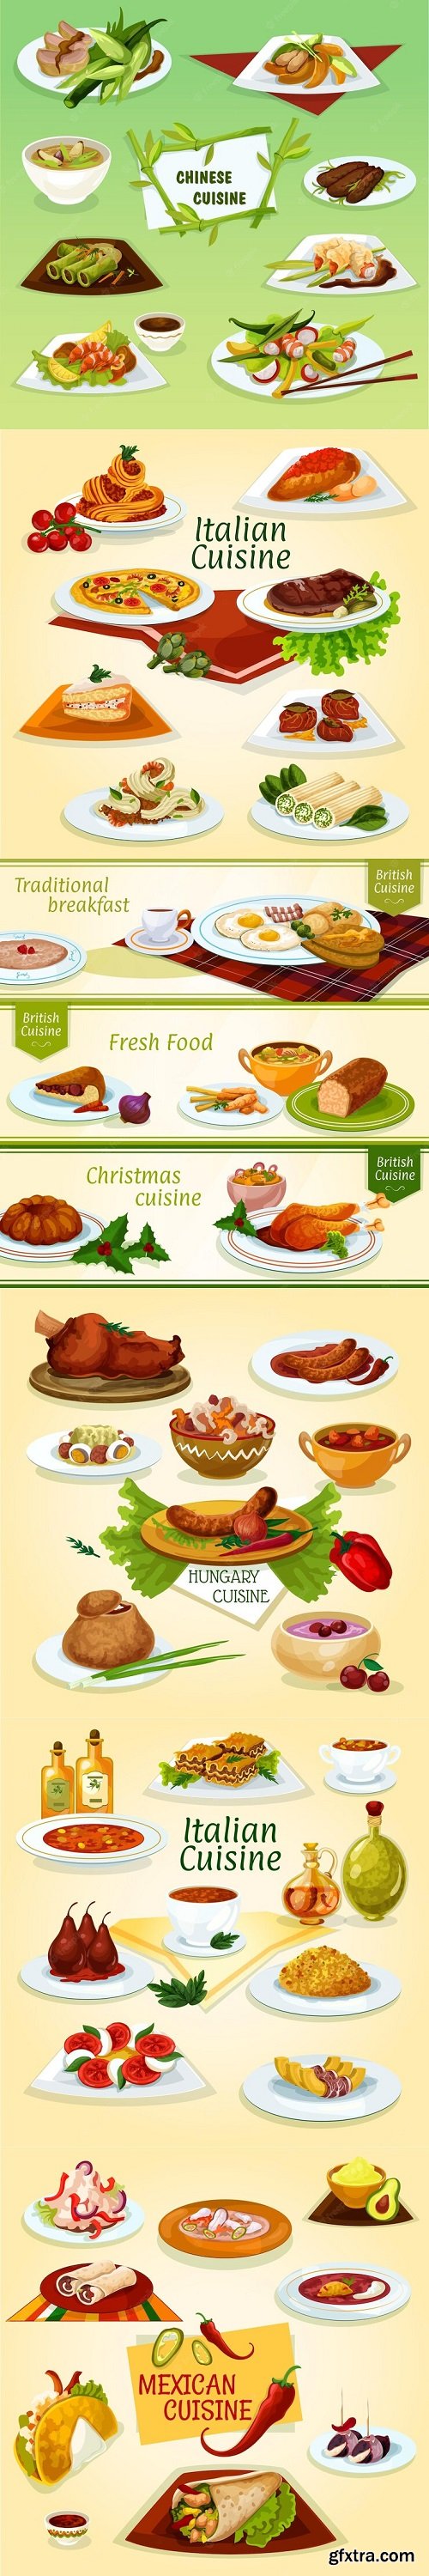 Different cuisine icon with popular dishes